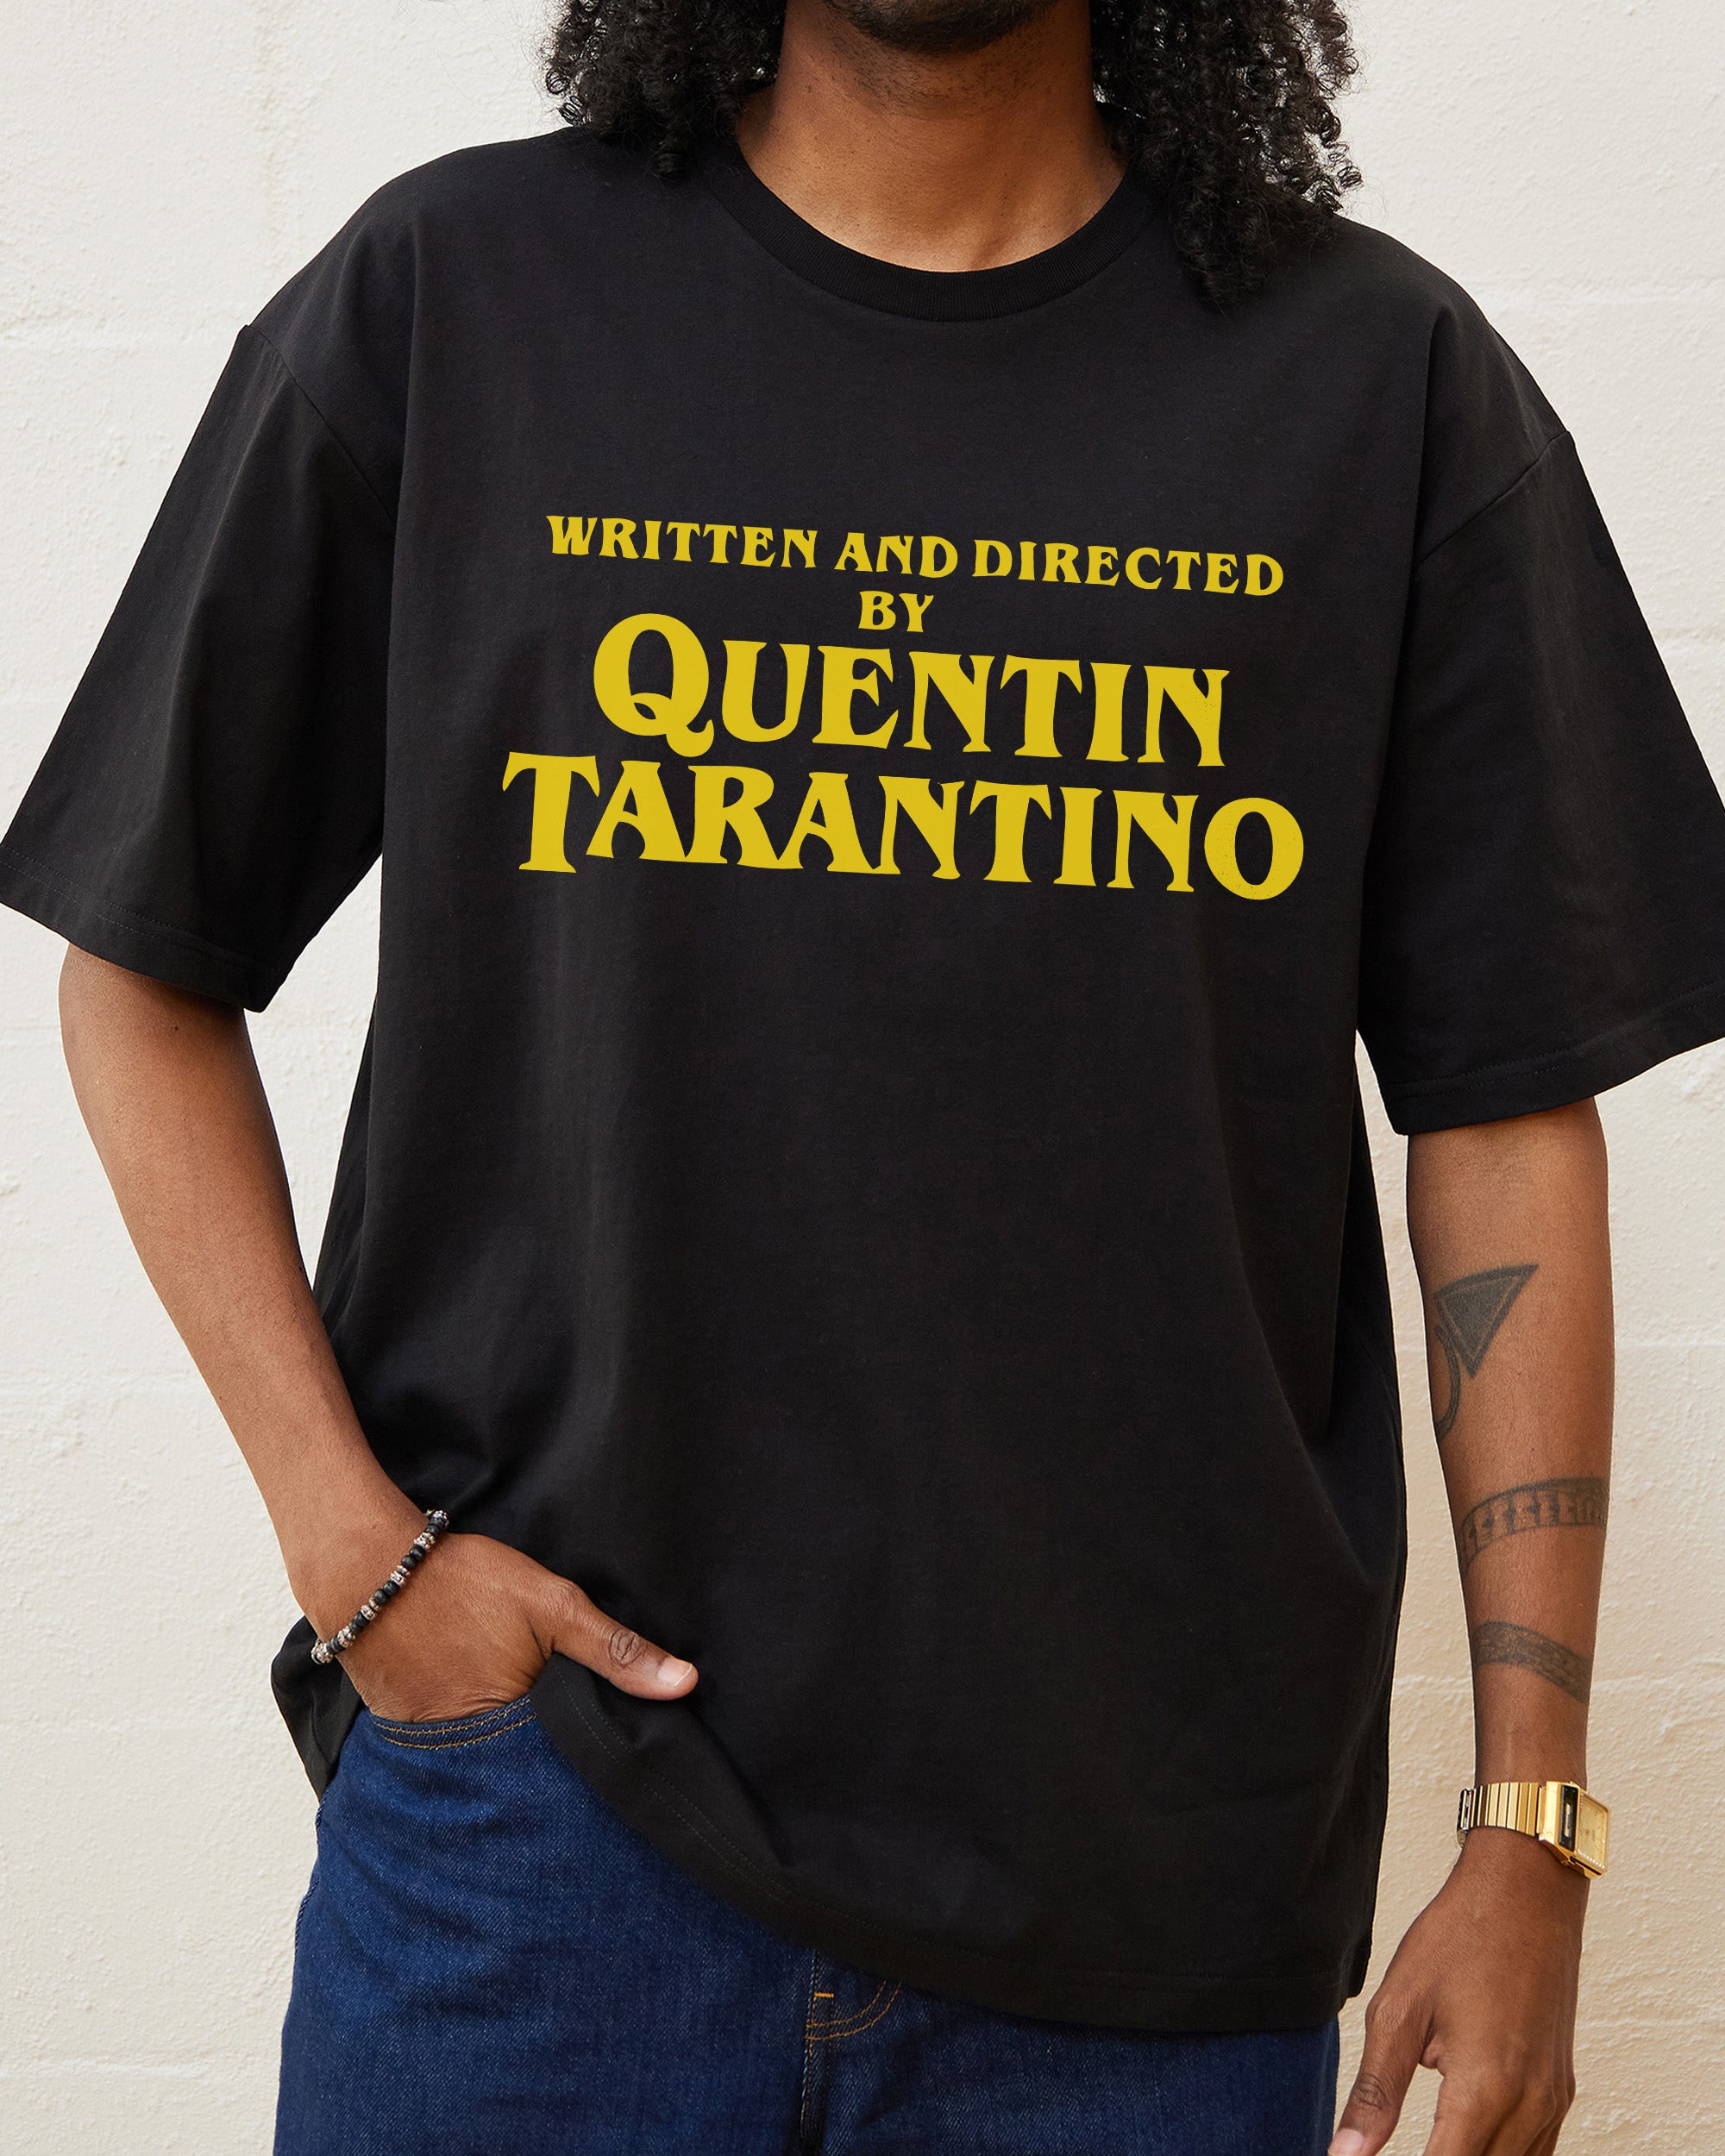 Written and Directed by Quentin Tarantino T-Shirt